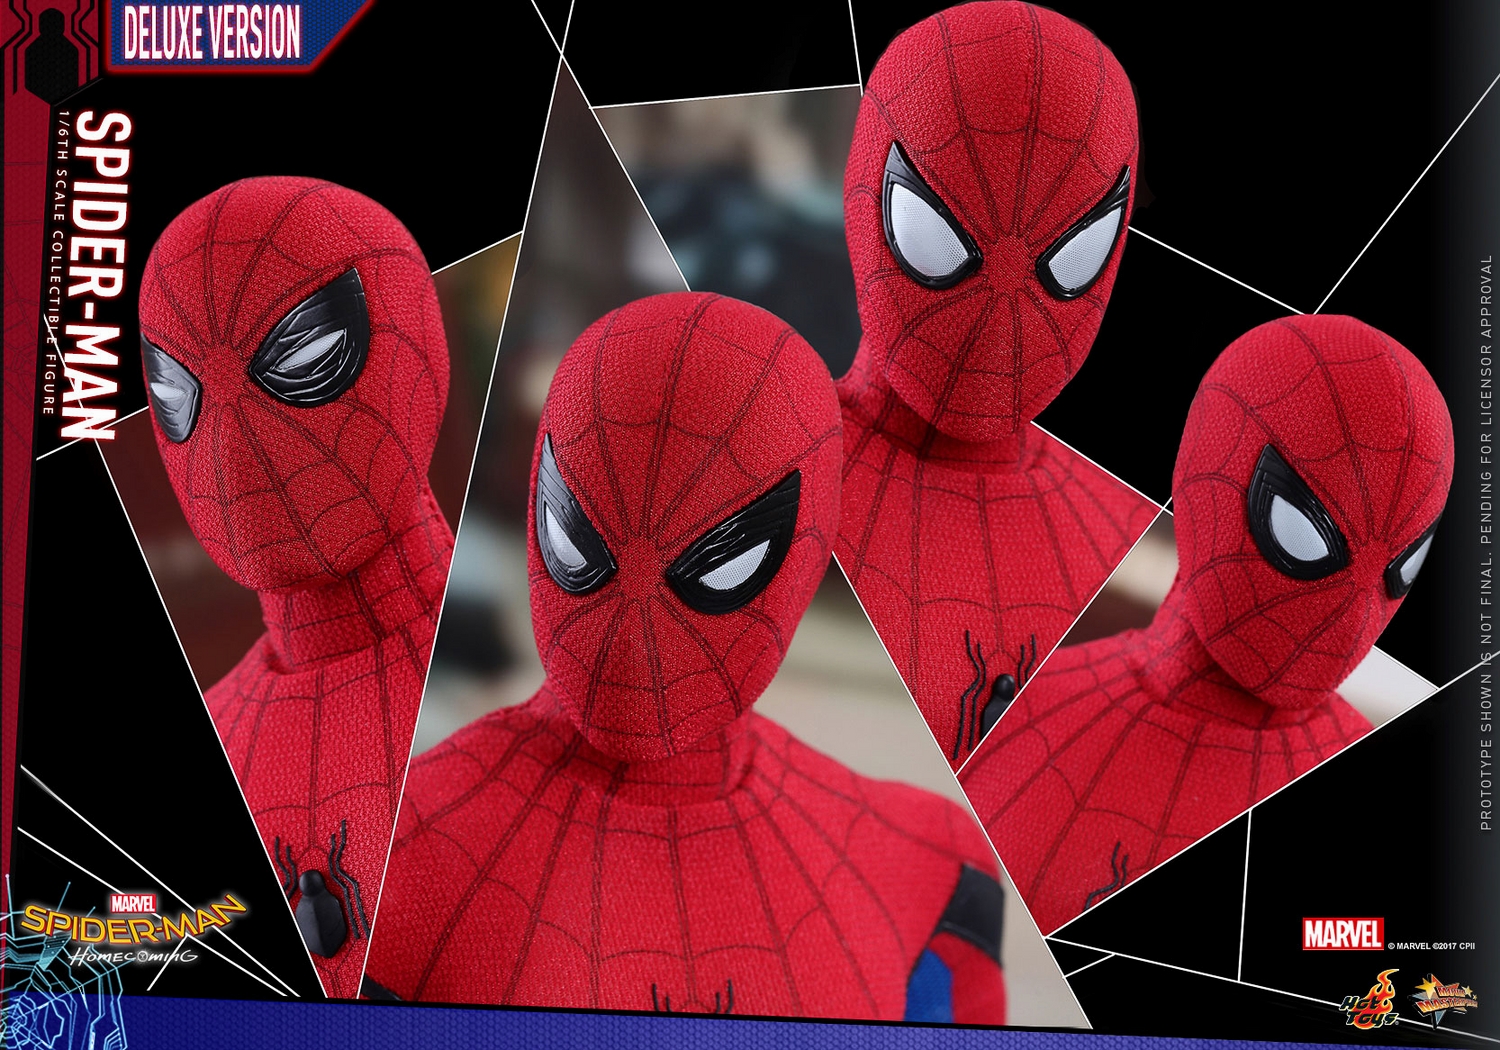 Hot-Toys-MMS426-Spider-Man-Homecoming-Deluxe-018.jpg